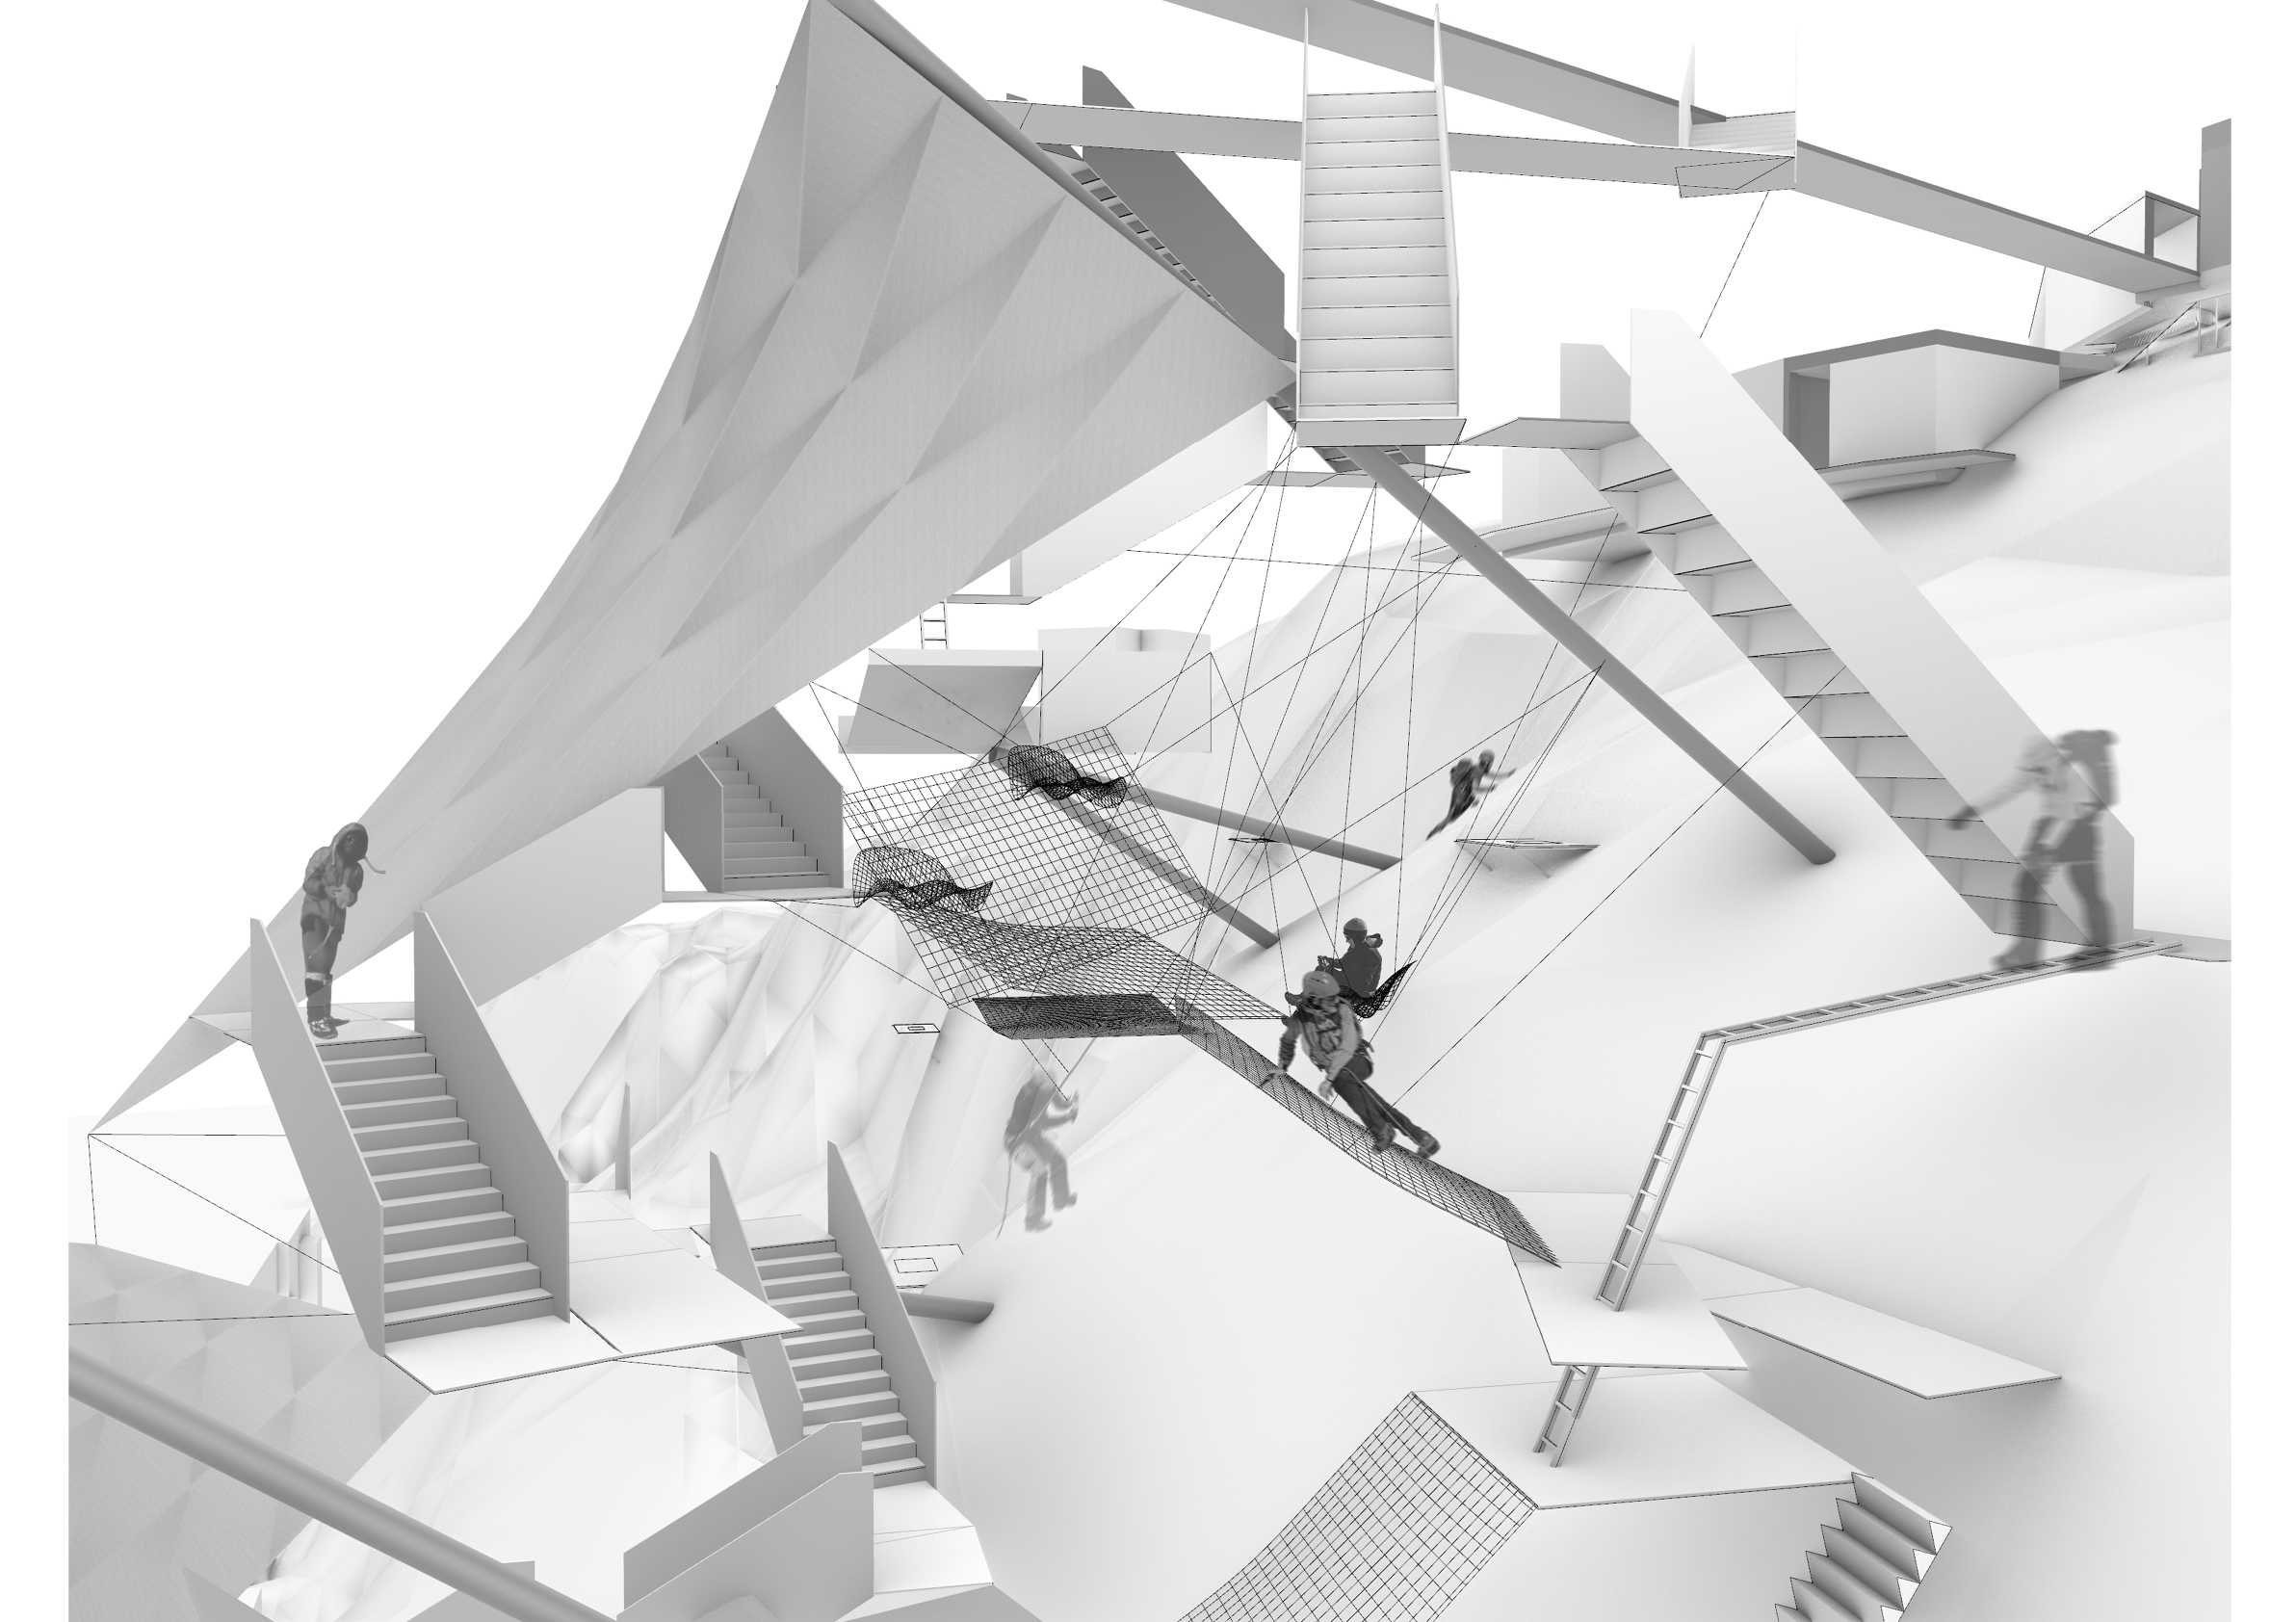 Architecture Visualisation by Finlay Irvine.